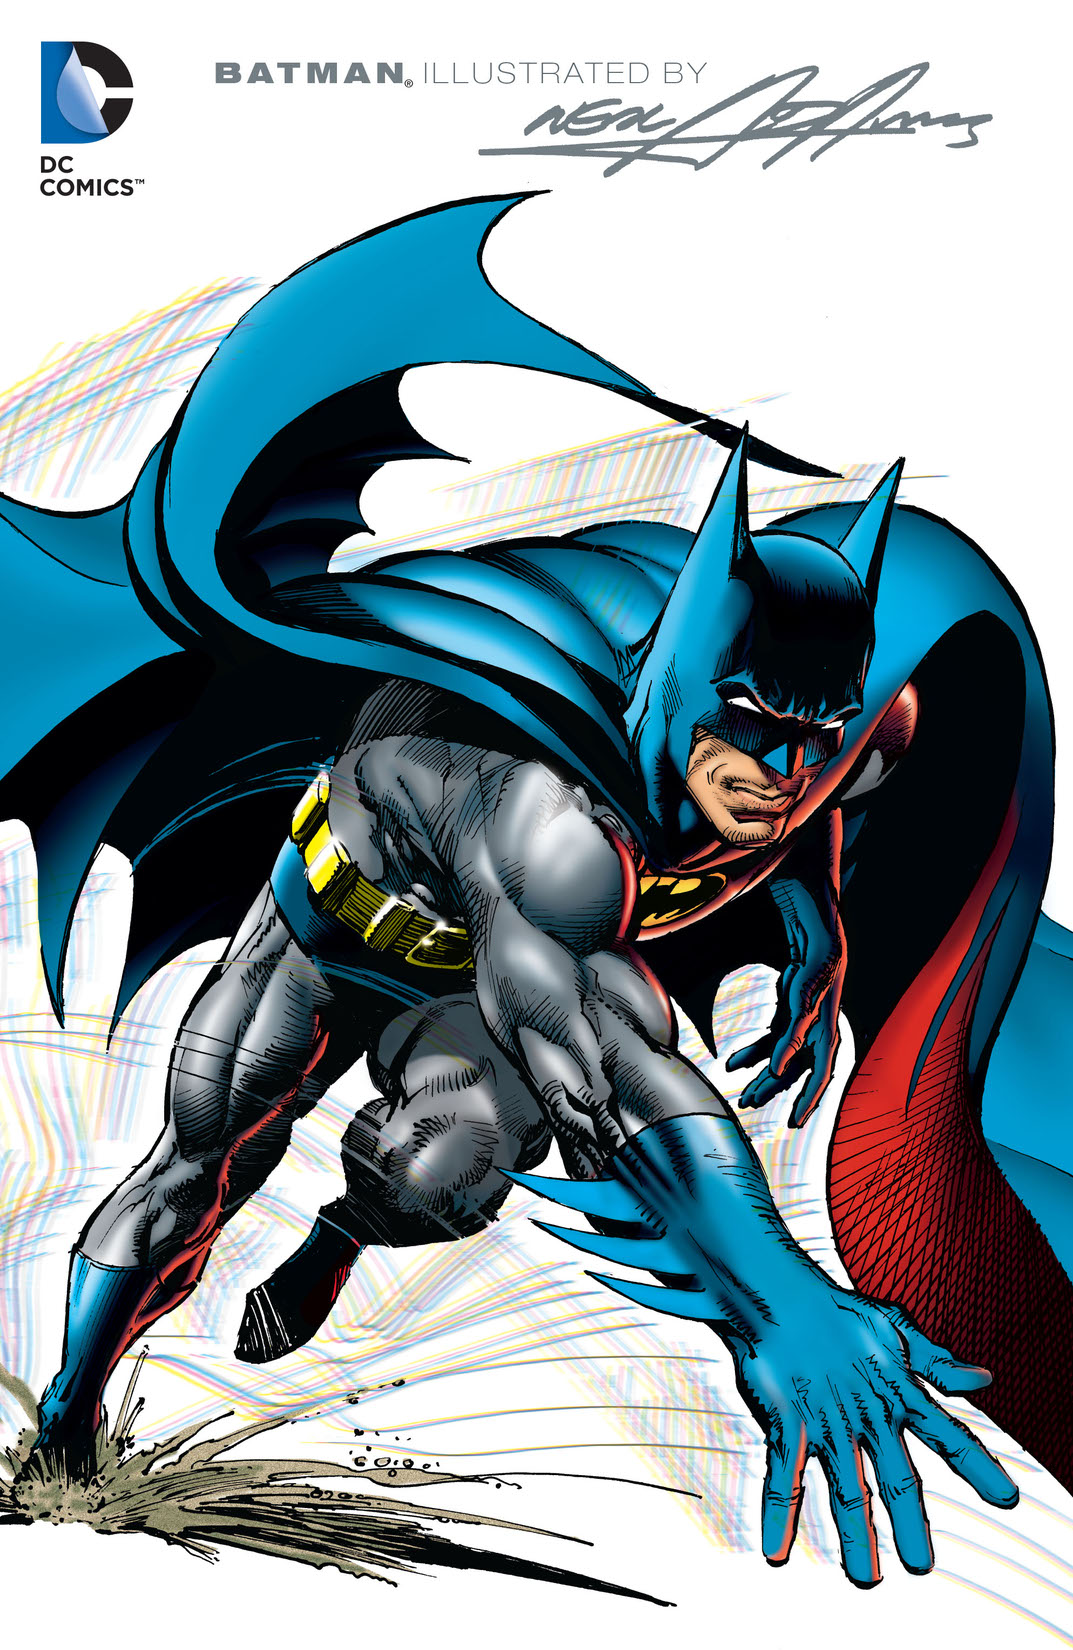 Batman: Illustrated by Neal Adams Vol. 1 preview images